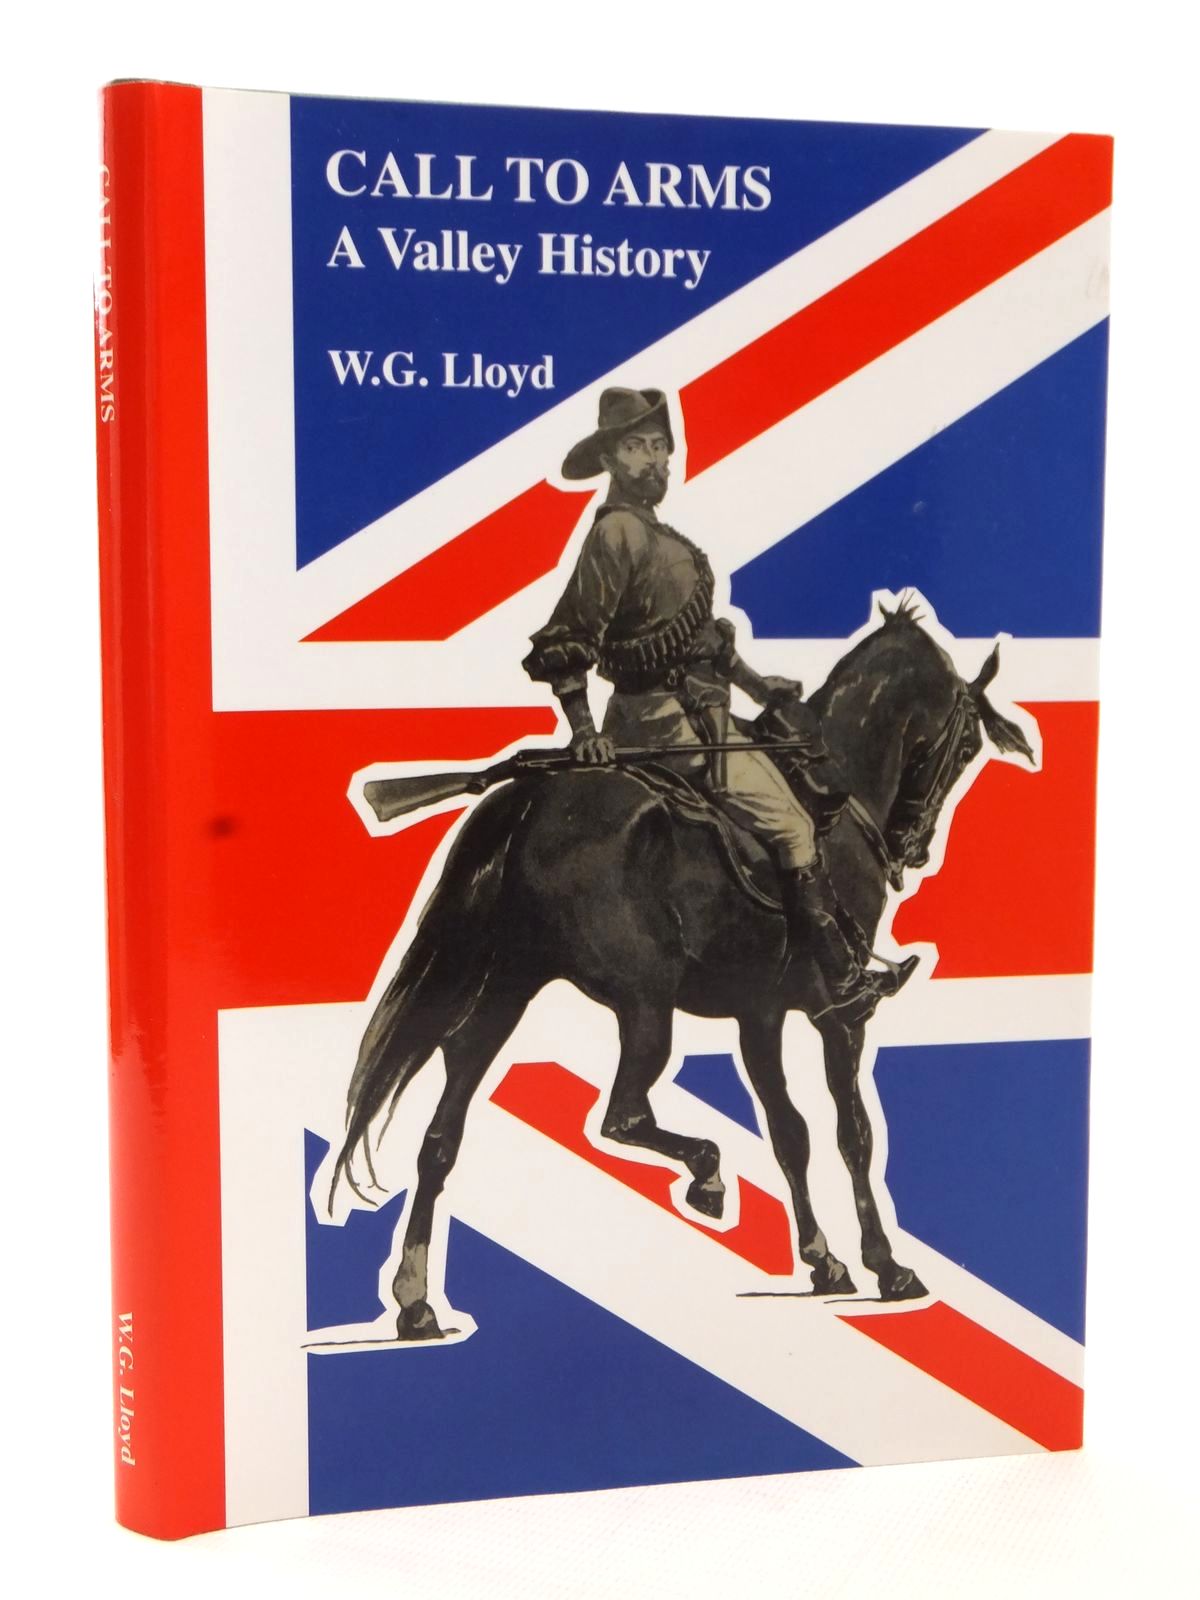 Photo of CALL TO ARMS A VALLEY HISTORY written by Lloyd, W.G. published by W.G. Lloyd (STOCK CODE: 1609269)  for sale by Stella & Rose's Books